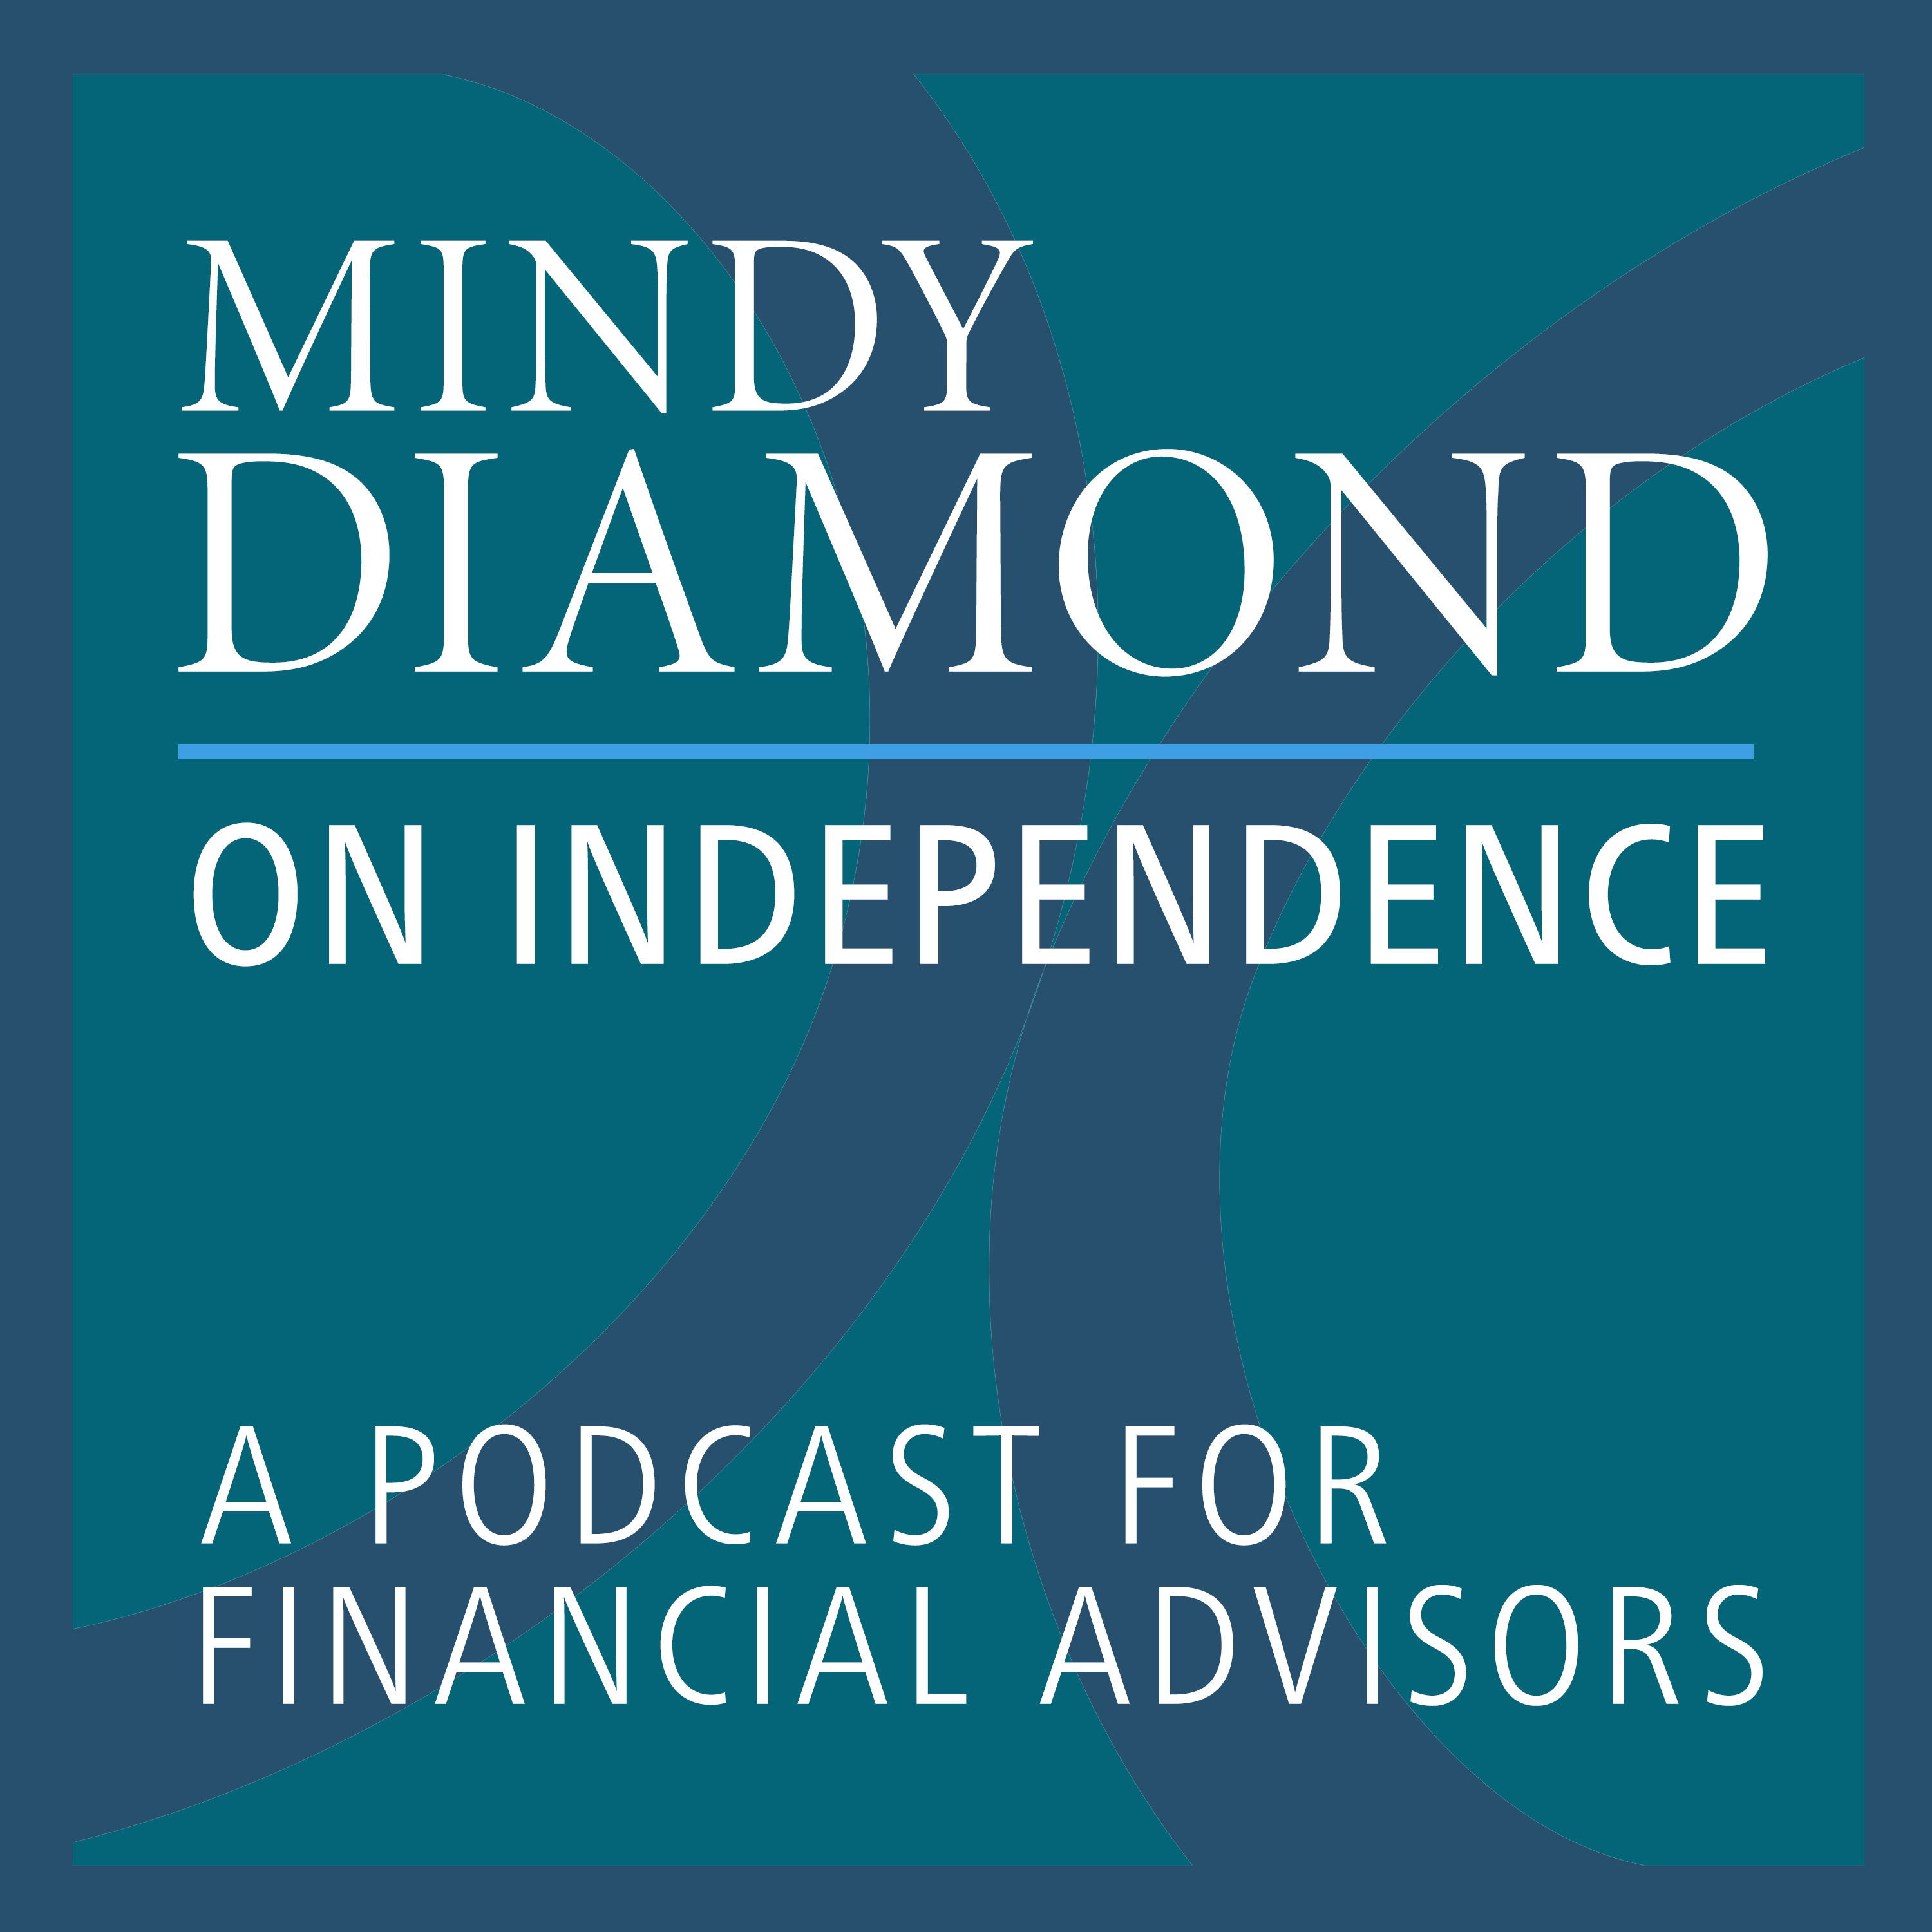 Mindy Diamond on Independence: A Podcast for Financial Advisors